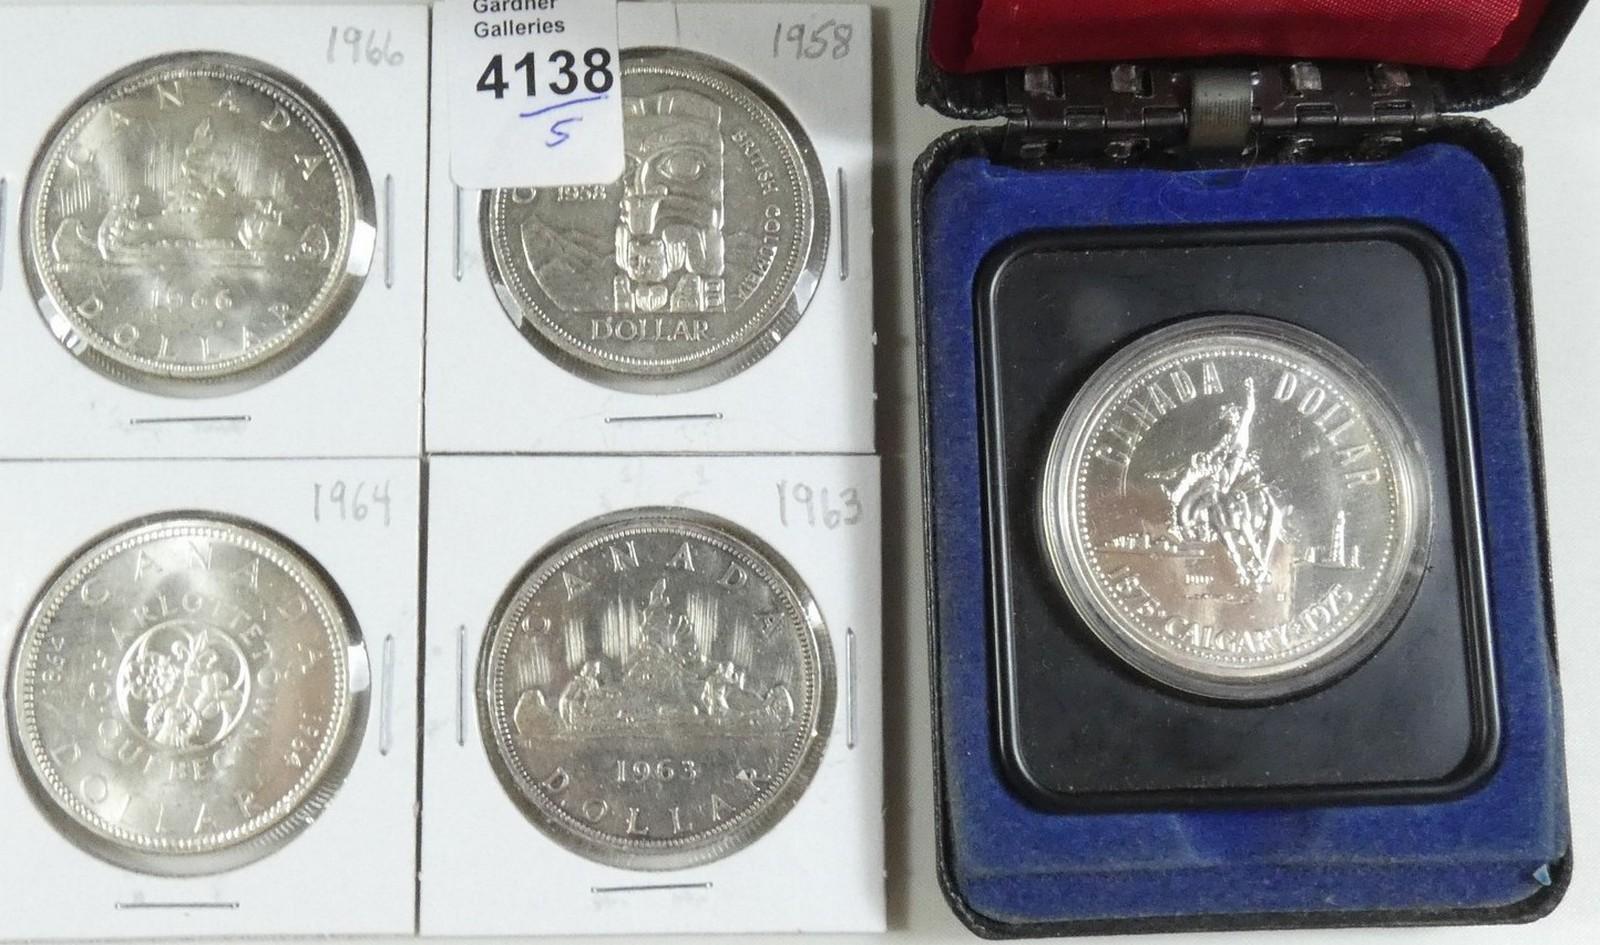 5 CANADIAN SILVER DOLLARS